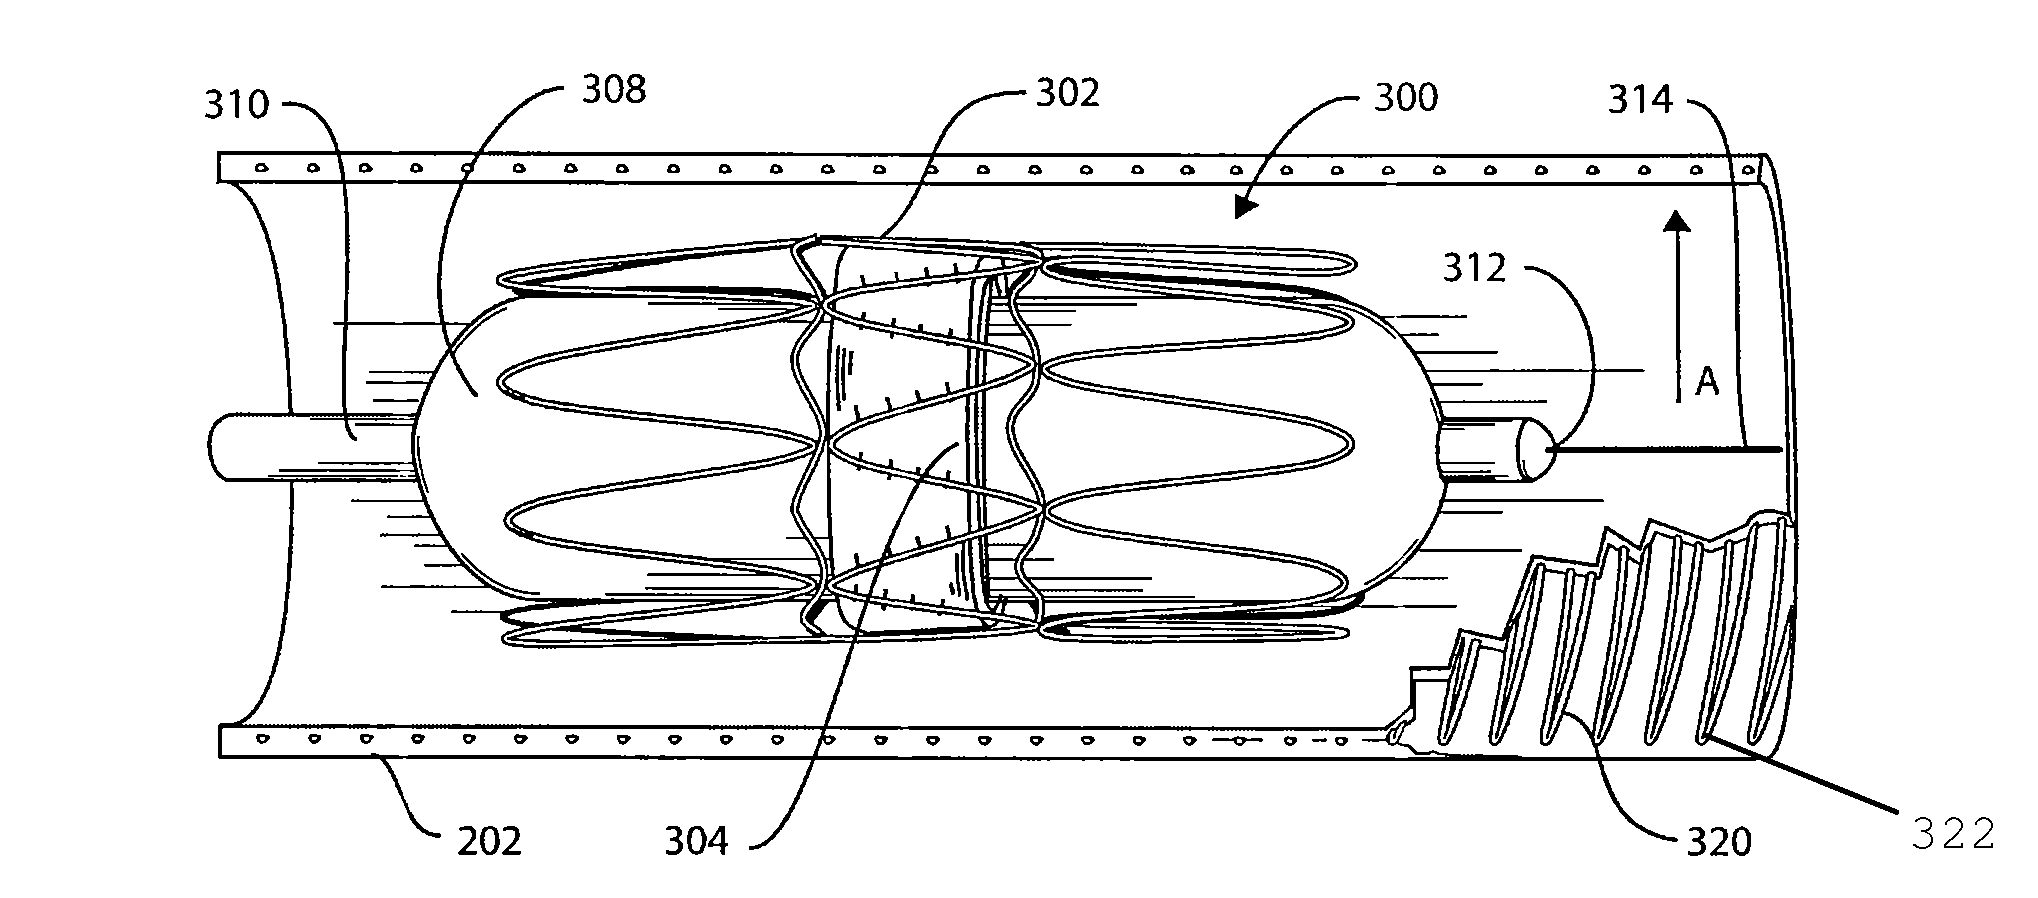 Reinforced surgical conduit for implantation of a stented valve therein